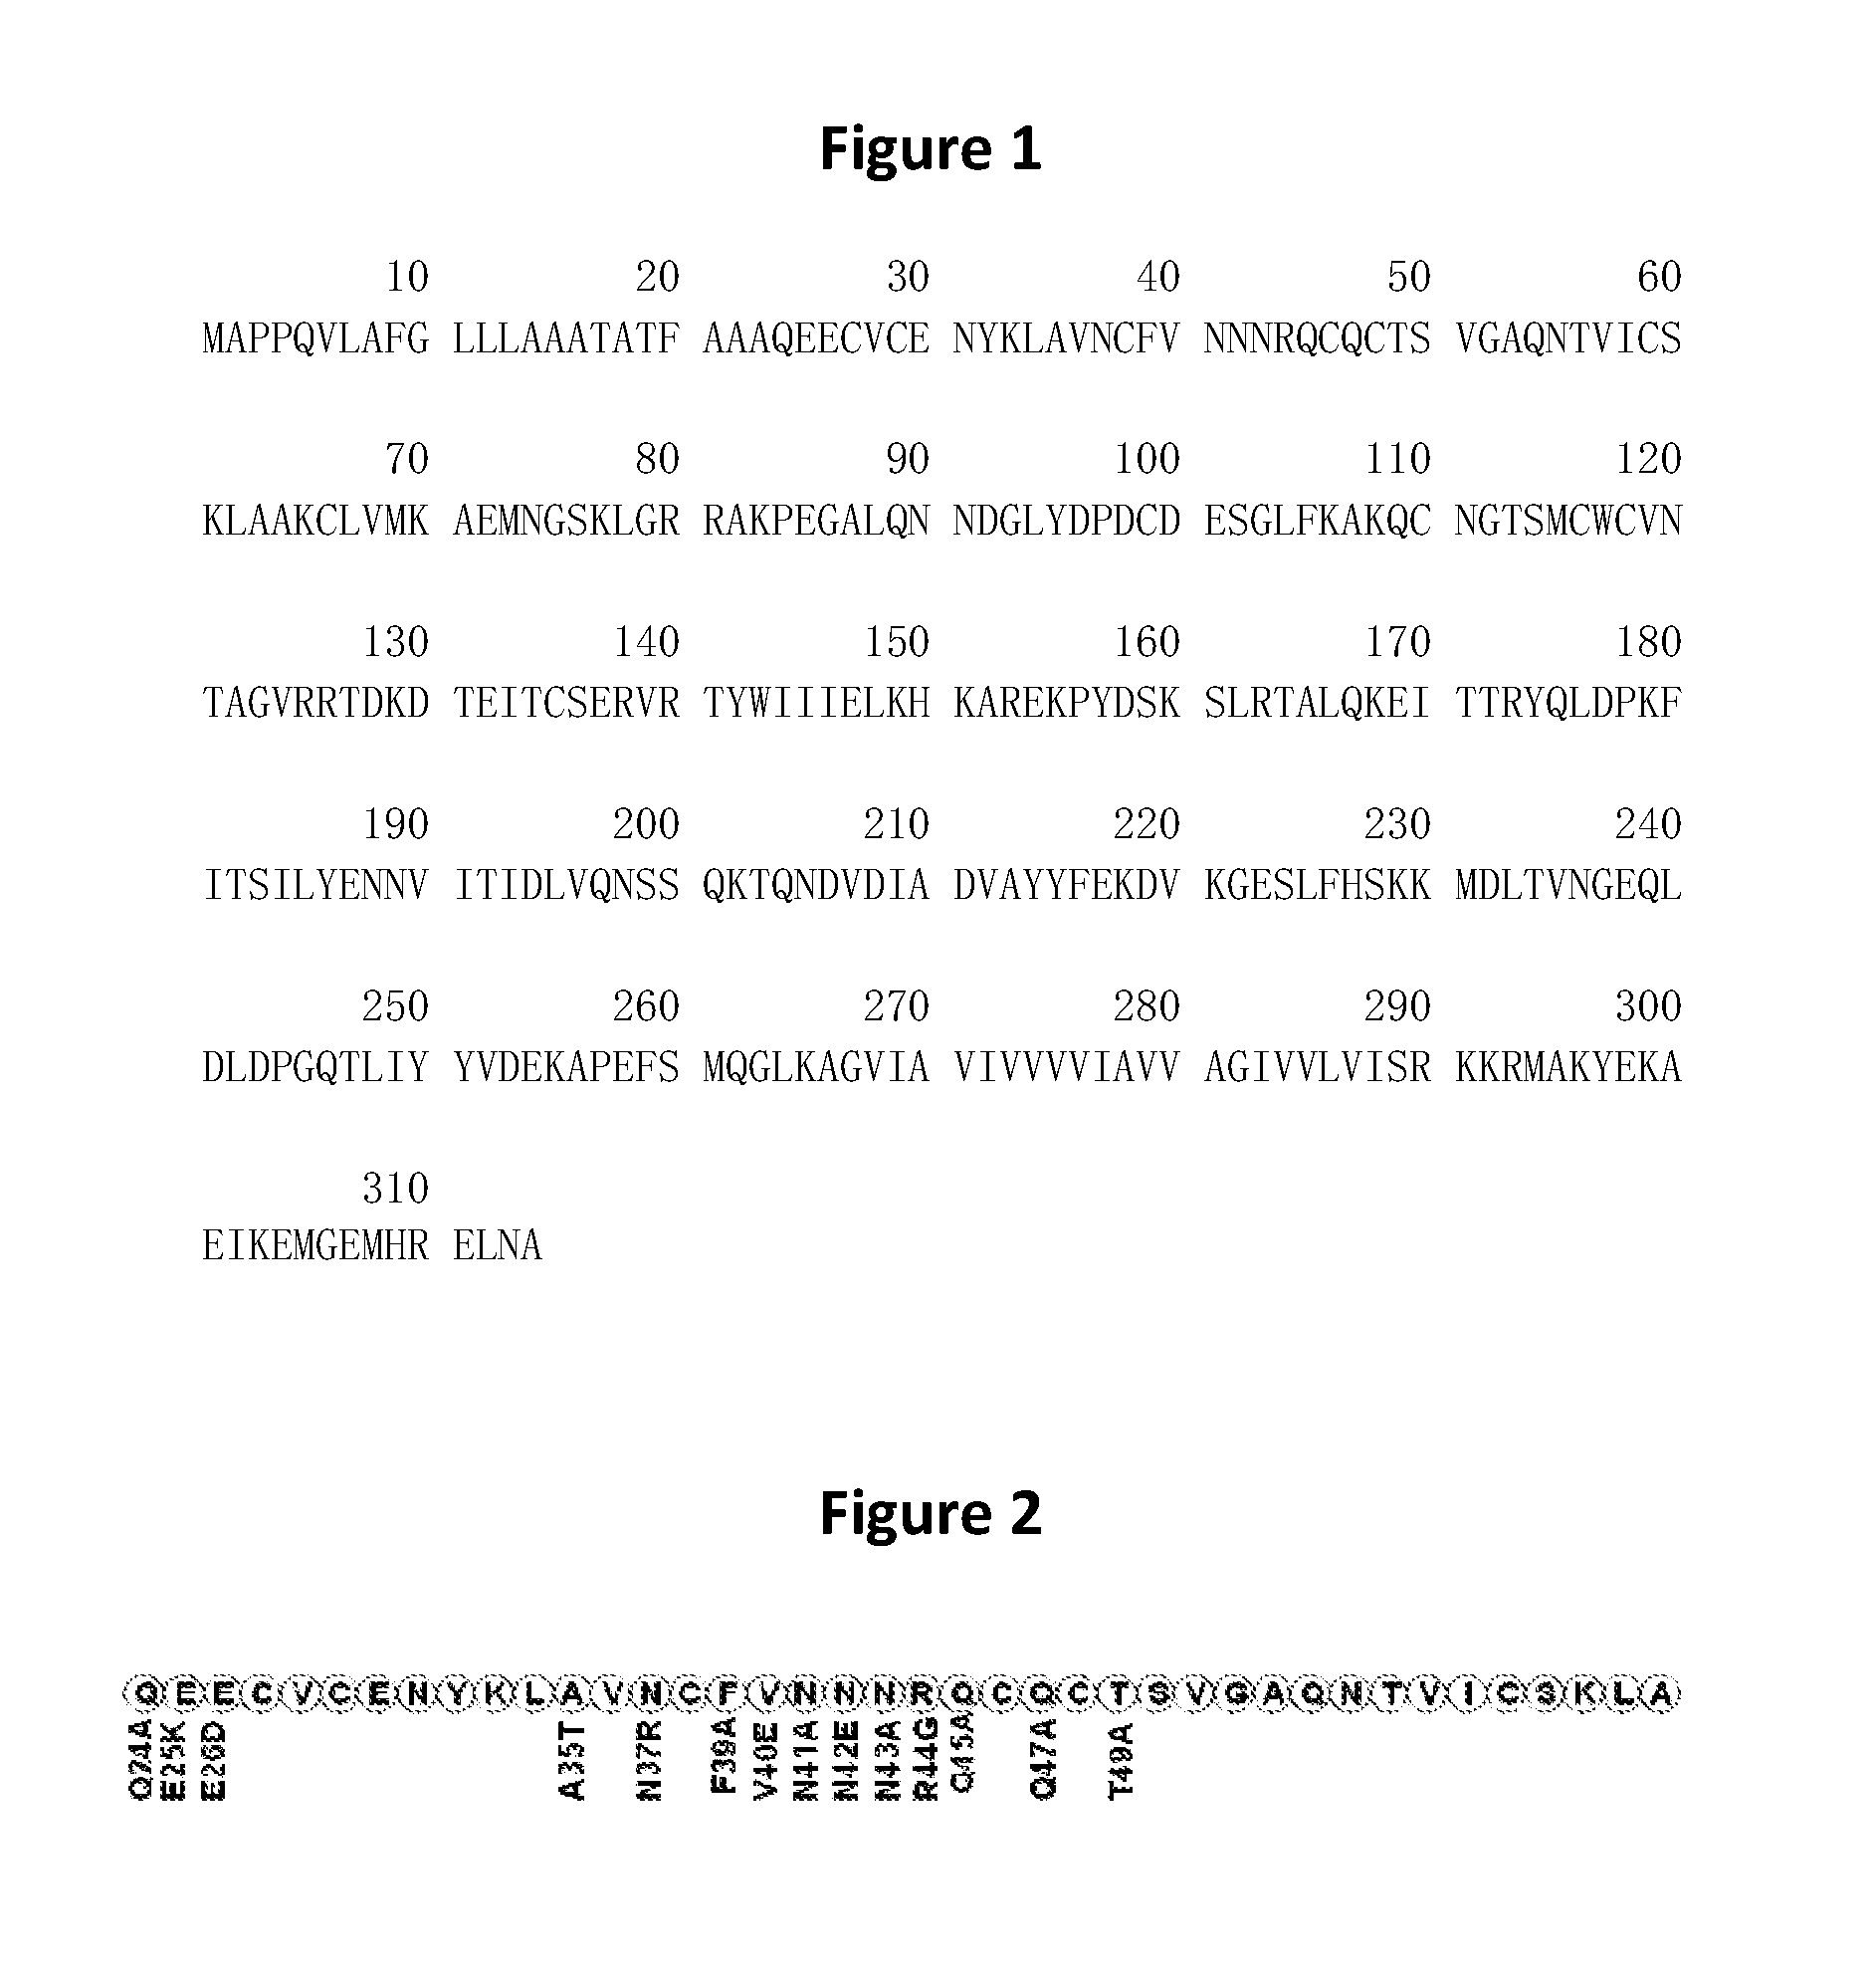 Anti-epcam antibodies that induce apoptosis of cancer cells and methods using same